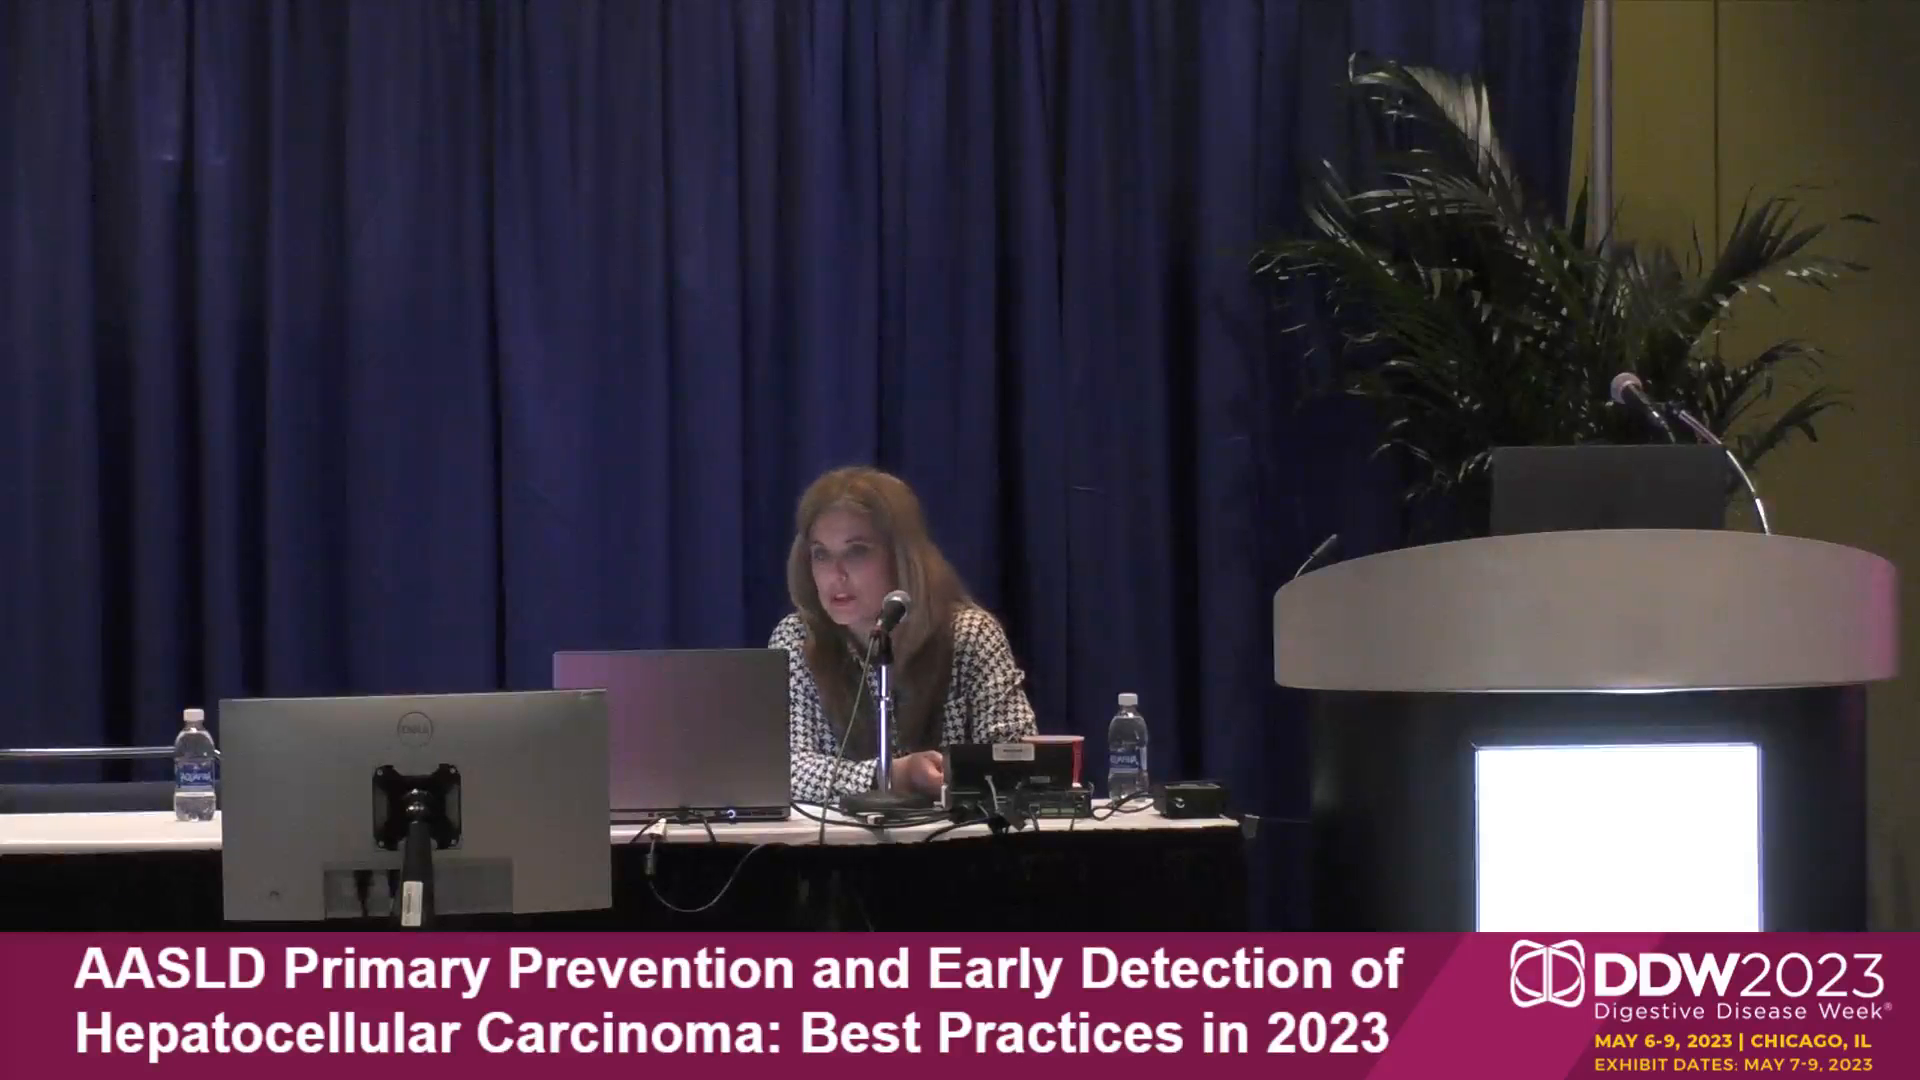 AASLD Primary Prevention and Early Detection of Hepatocellular